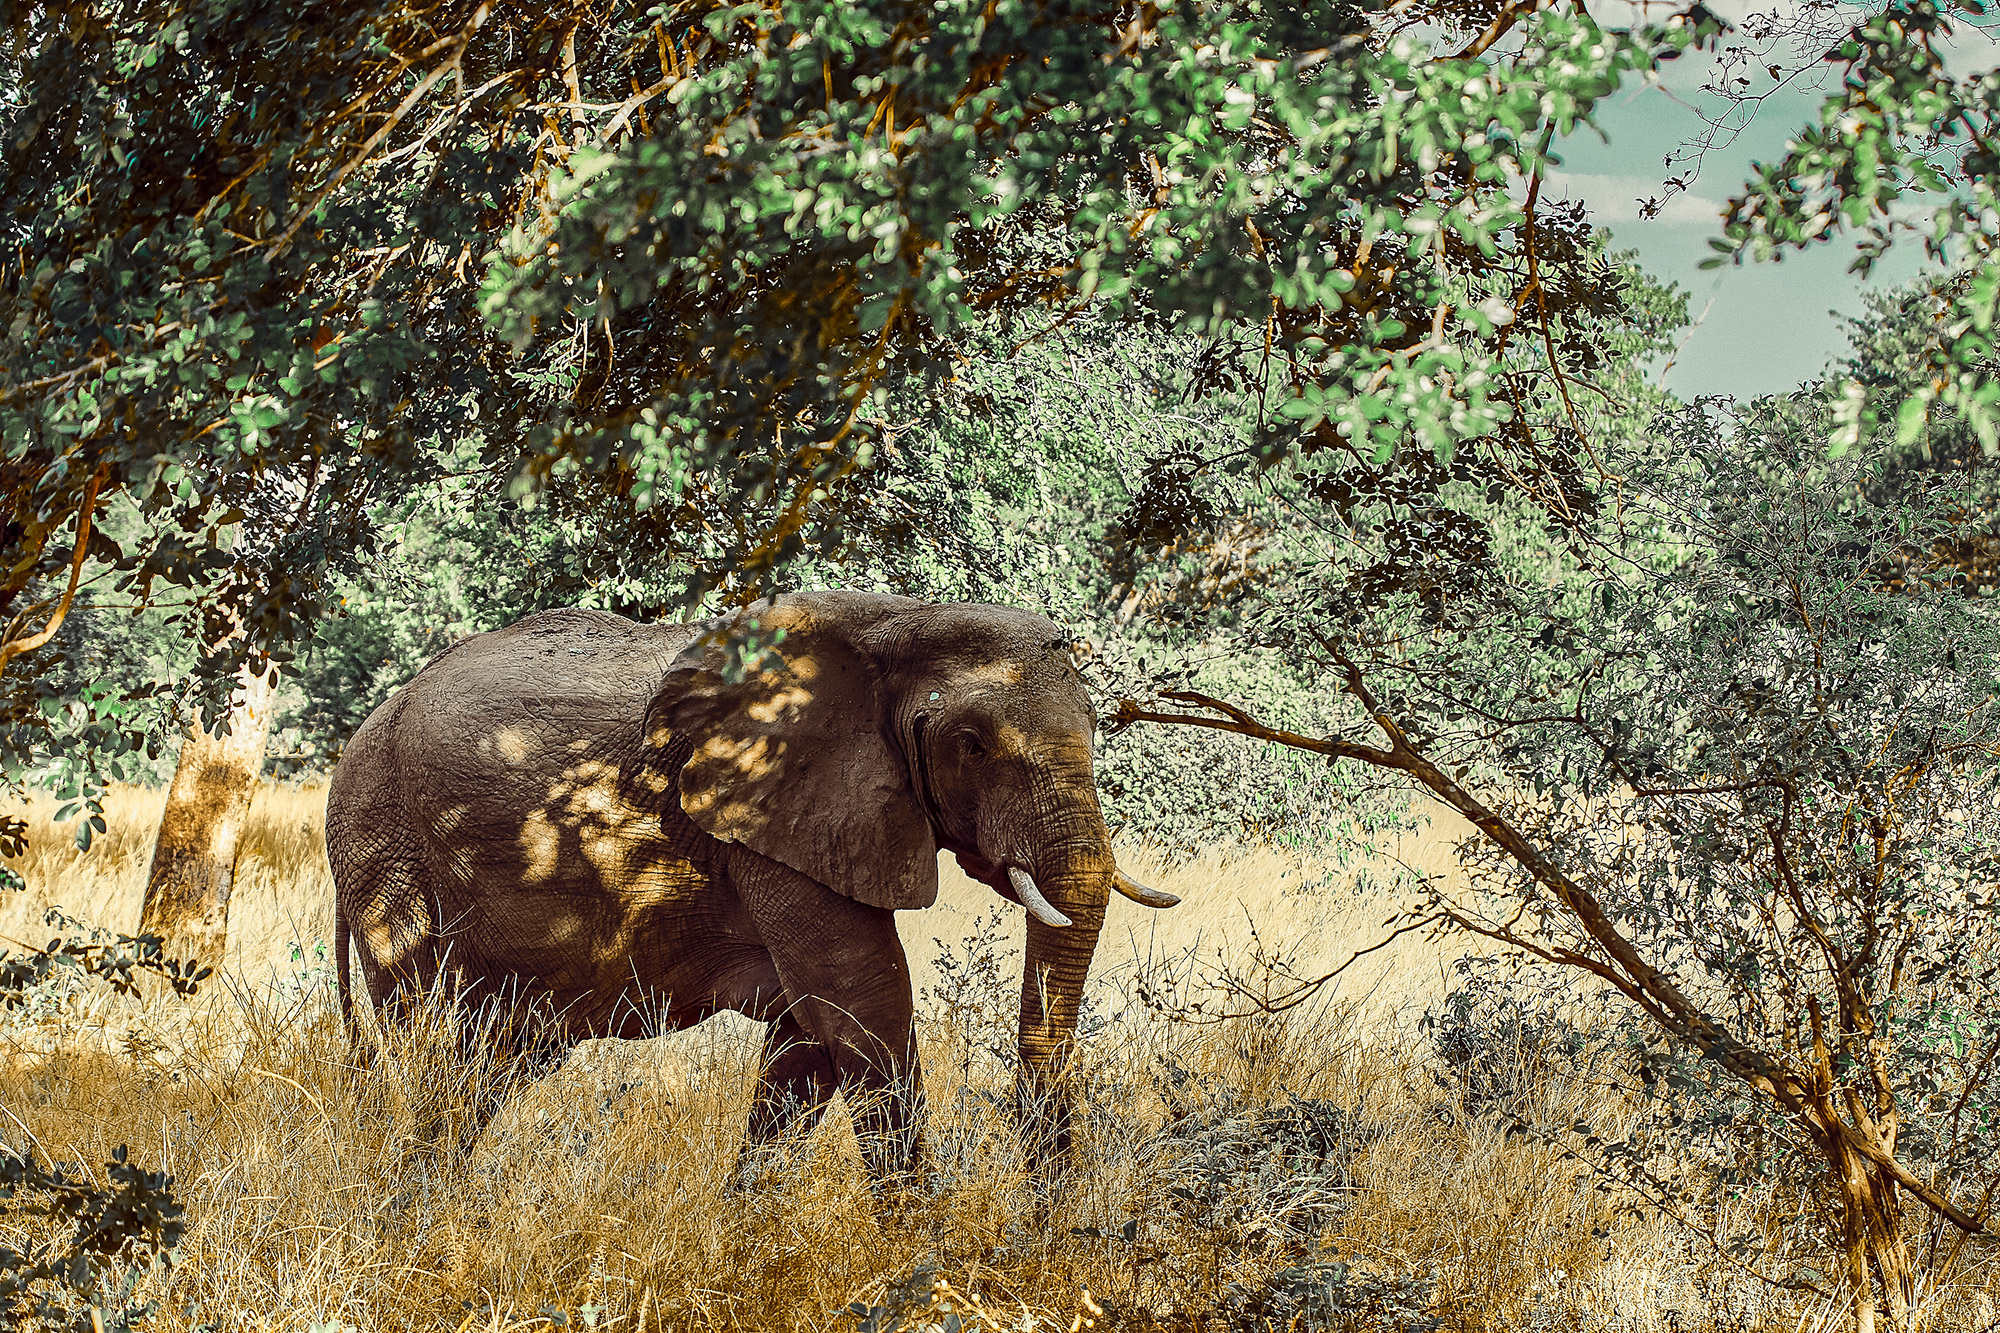 Elephant walks through brown grass, surrounded by green trees